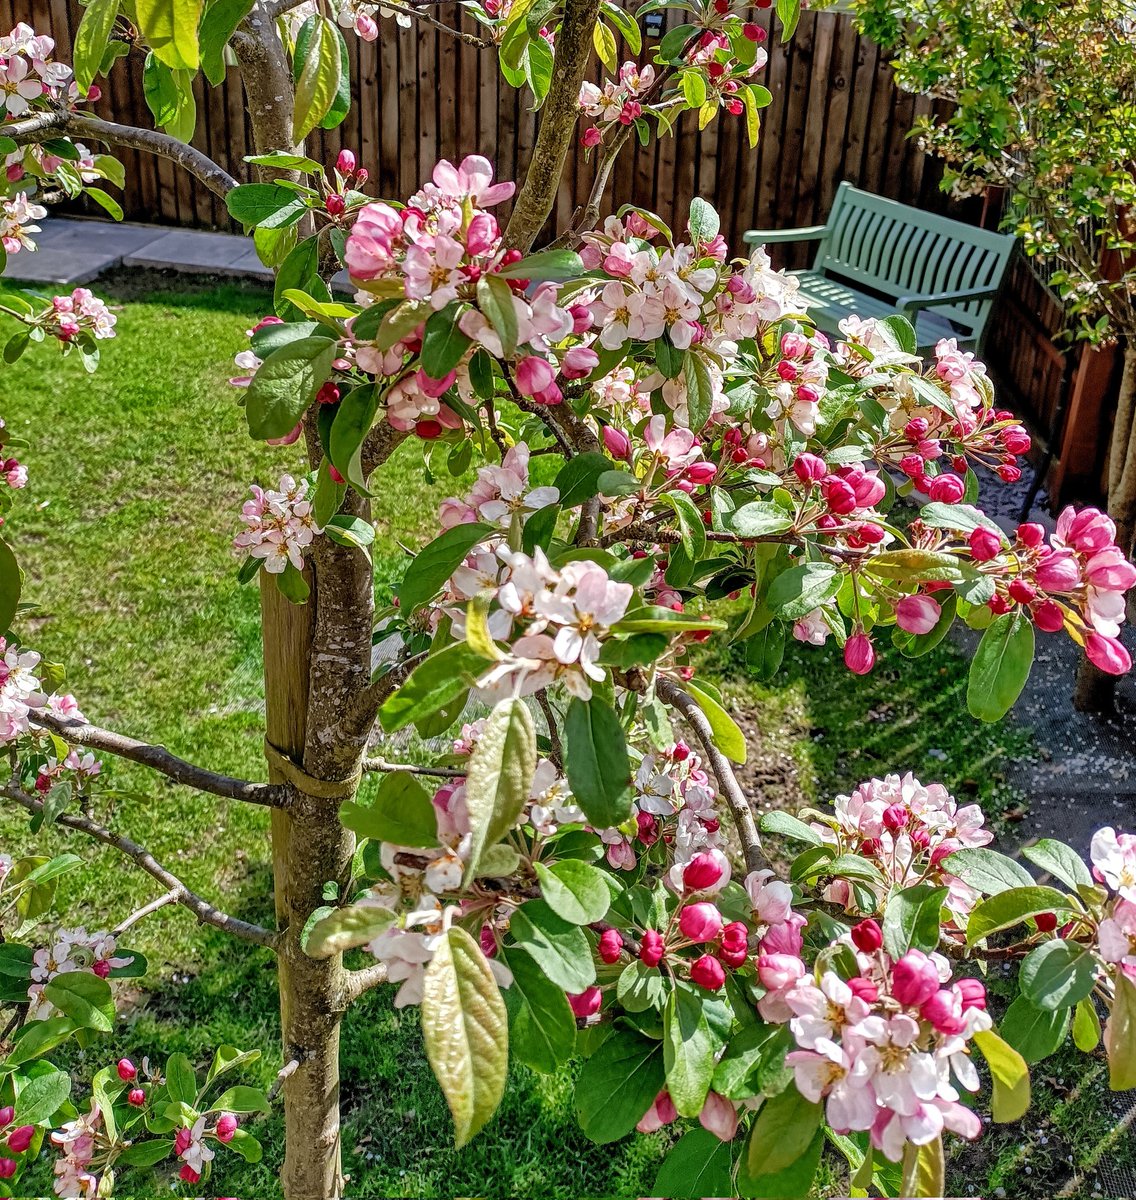 The crabapple blossom looks and smells fantastic as ever #gardening #Blossom #trees #Flowers #crabapple #garden #greenfingers